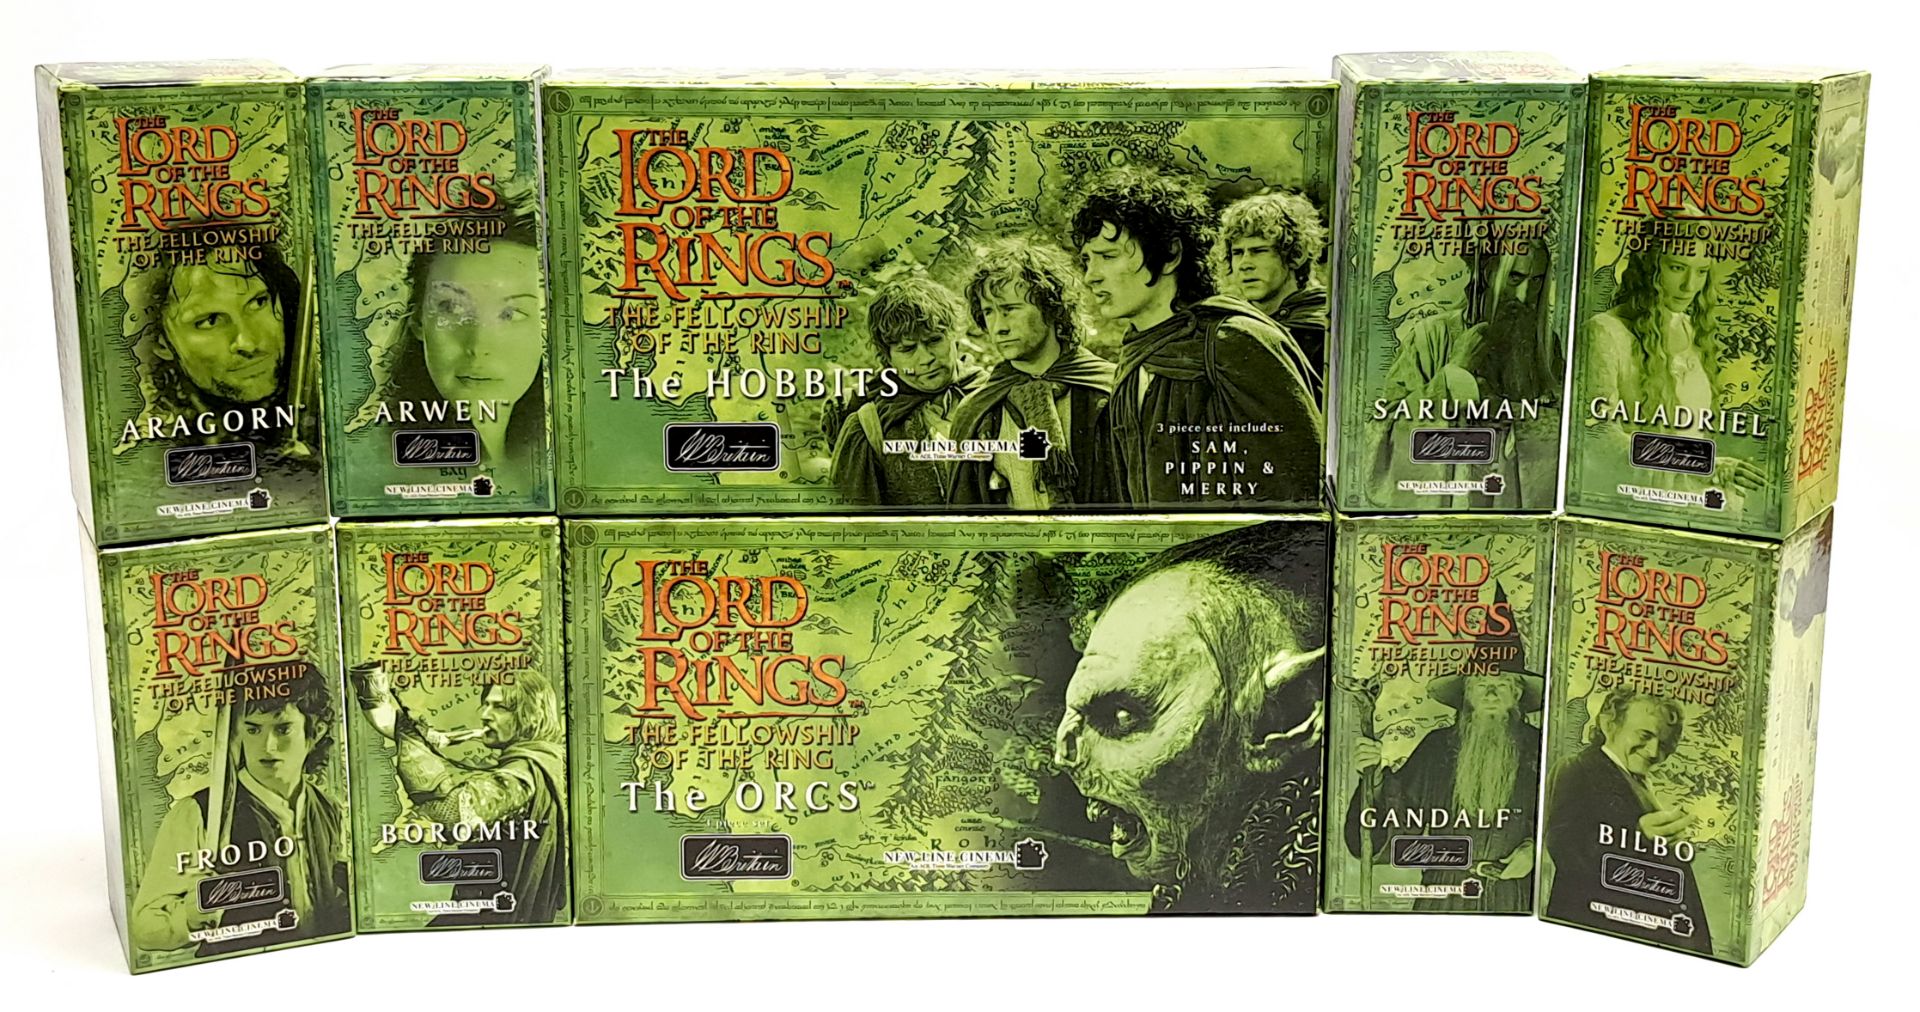 Britains, The Lord of the Rings The Fellowship of the Ring hand painted collectable figures